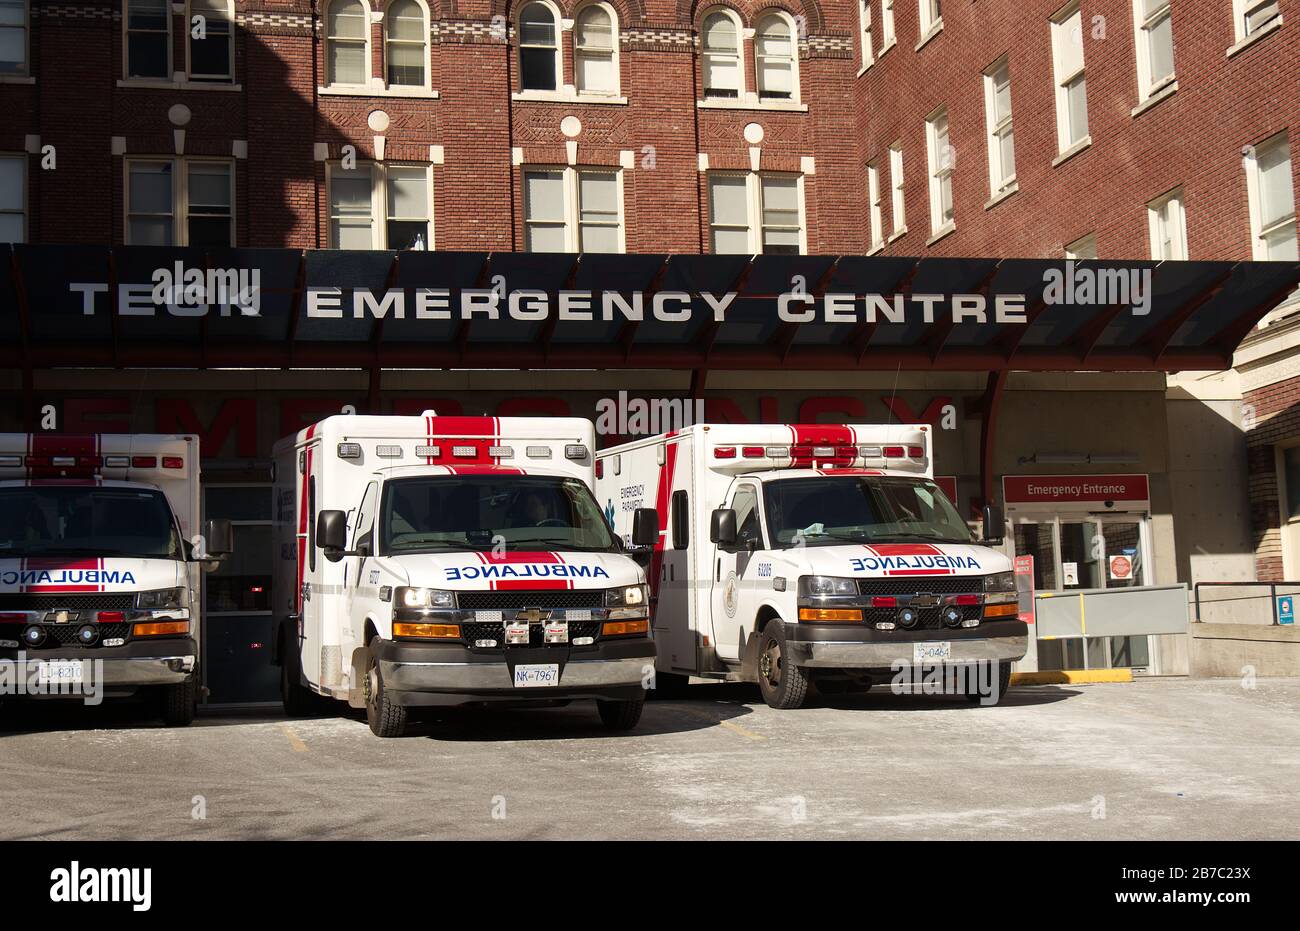 Vancouver, Canada - Feb 20,2020: View of Emergency Department 'Teck Emergency Centre' at St Paul Hospital with ambulance vehicles near the entrance Stock Photo